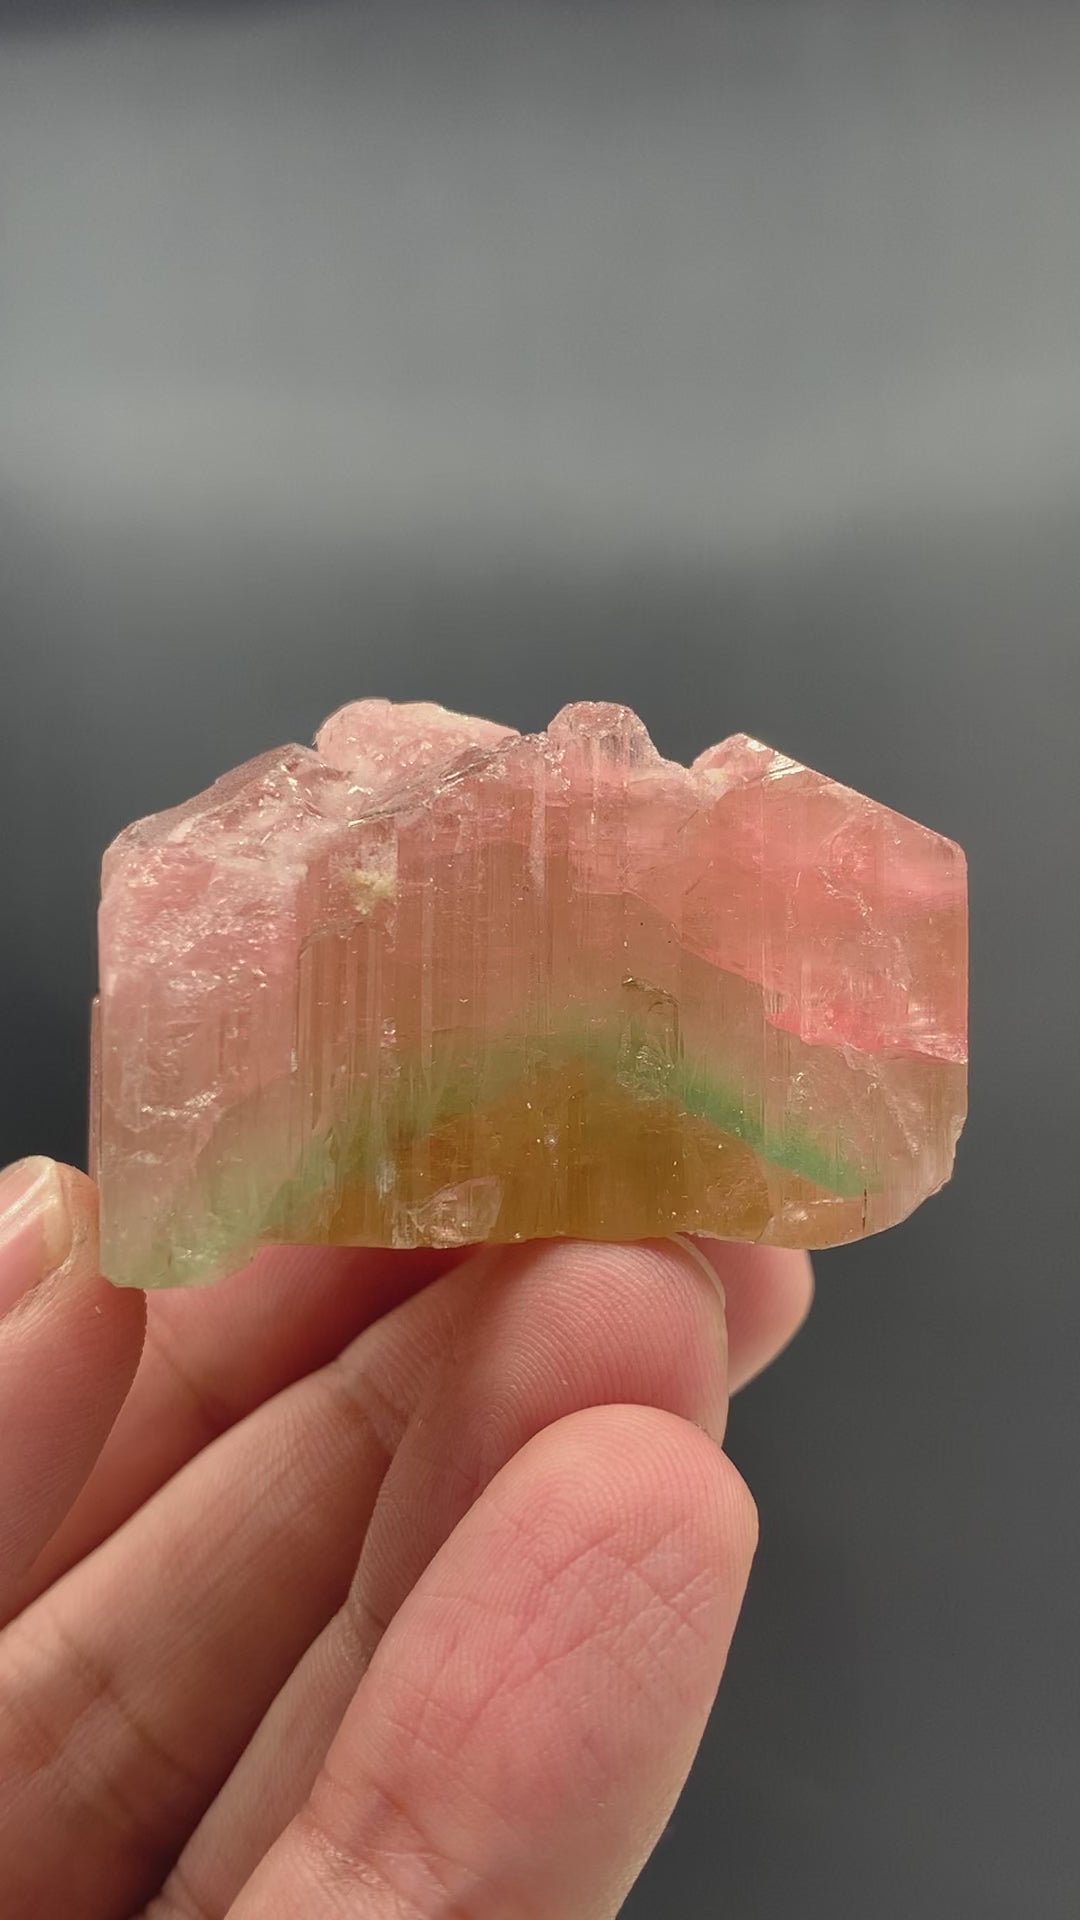 Spectacular Tri Color Tourmaline Crystal From Paprook